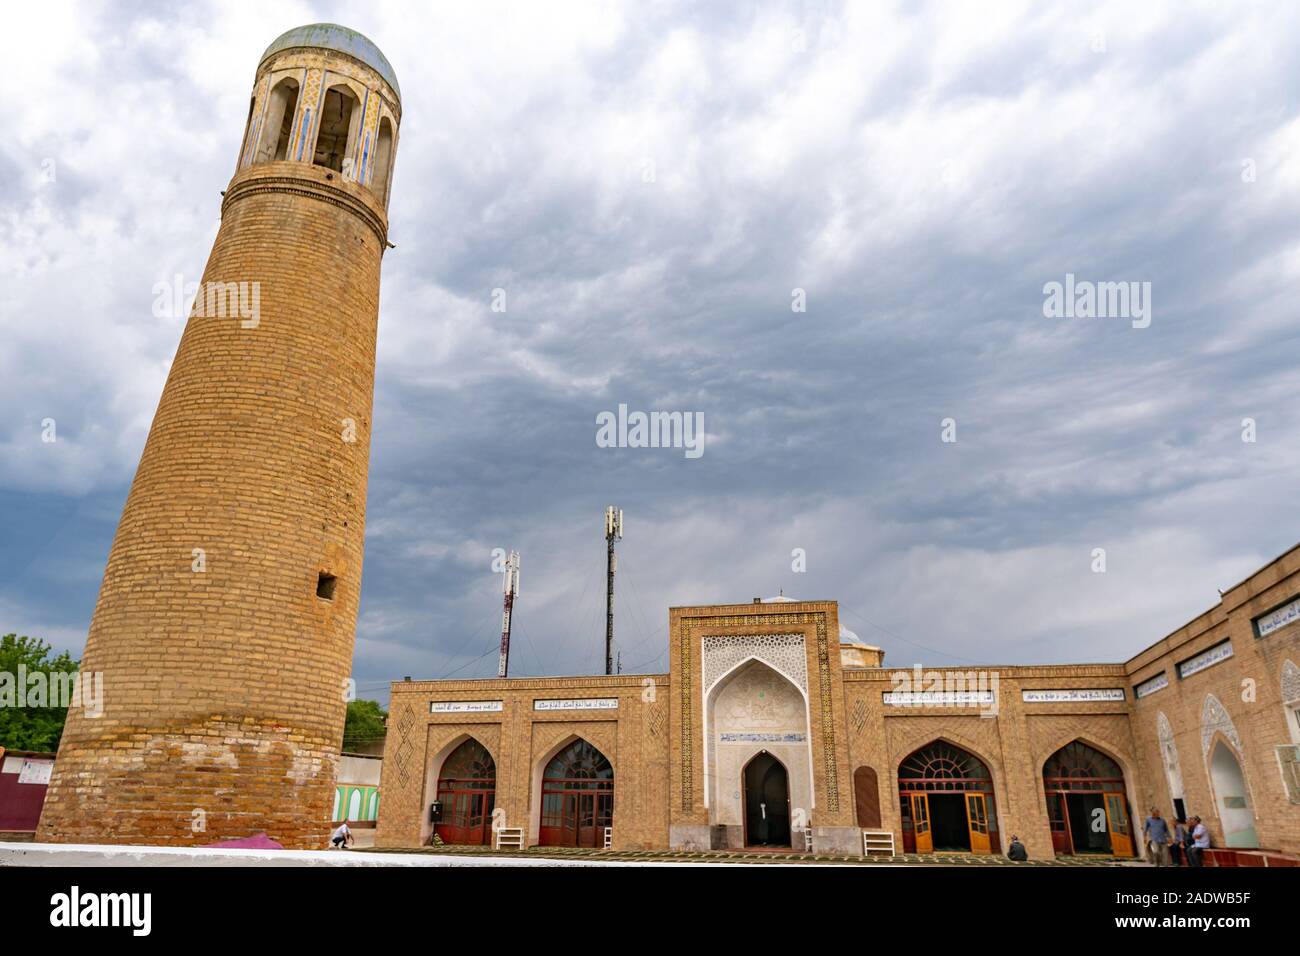 Isfara Abdullo Khan Mosque Madrasa Picturesque View of Minaret Tower and Iwan on a Cloudy Rainy Day Stock Photo